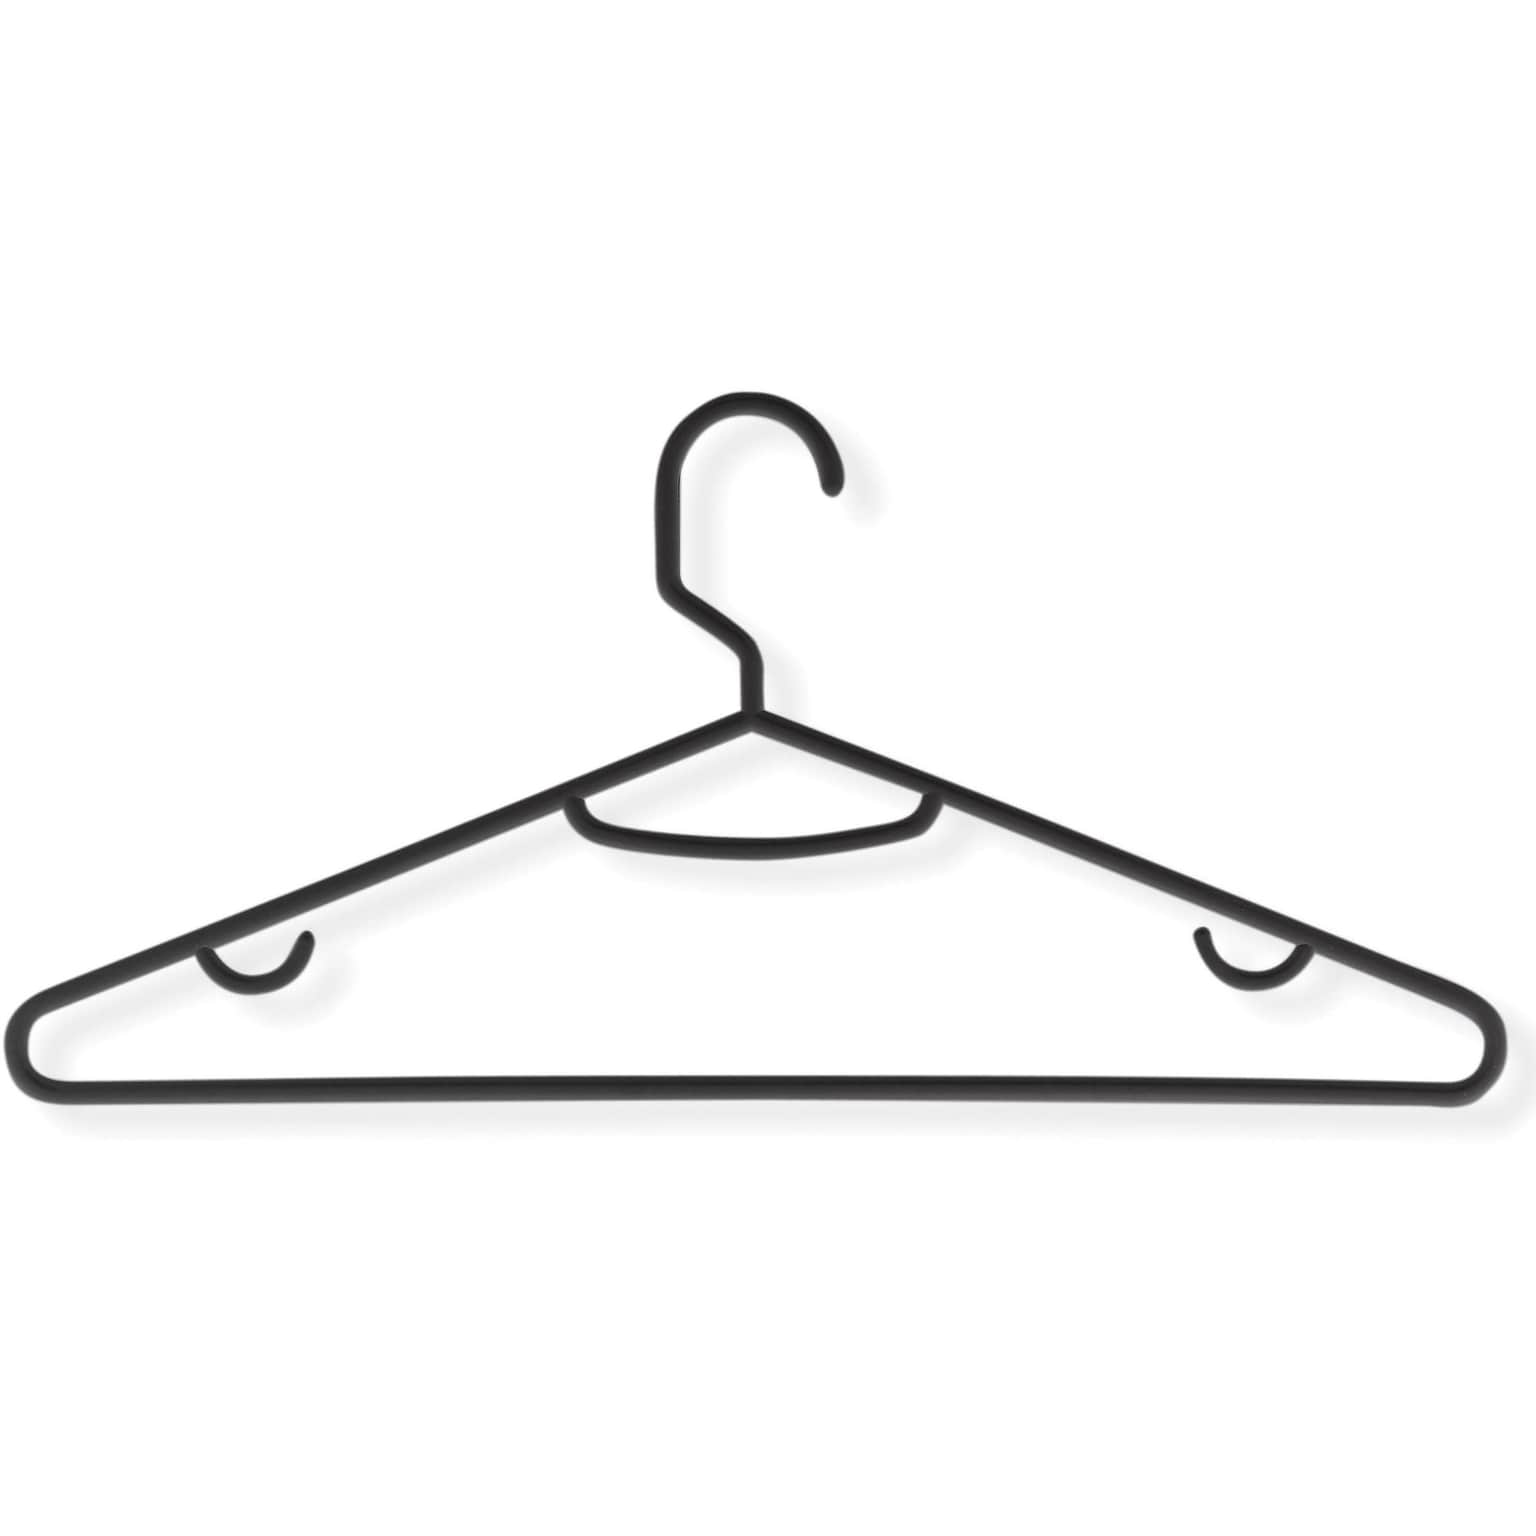 Honey-Can-Do Plastic Clothes Hangers, Black, 60/Pack (HNG-01520)